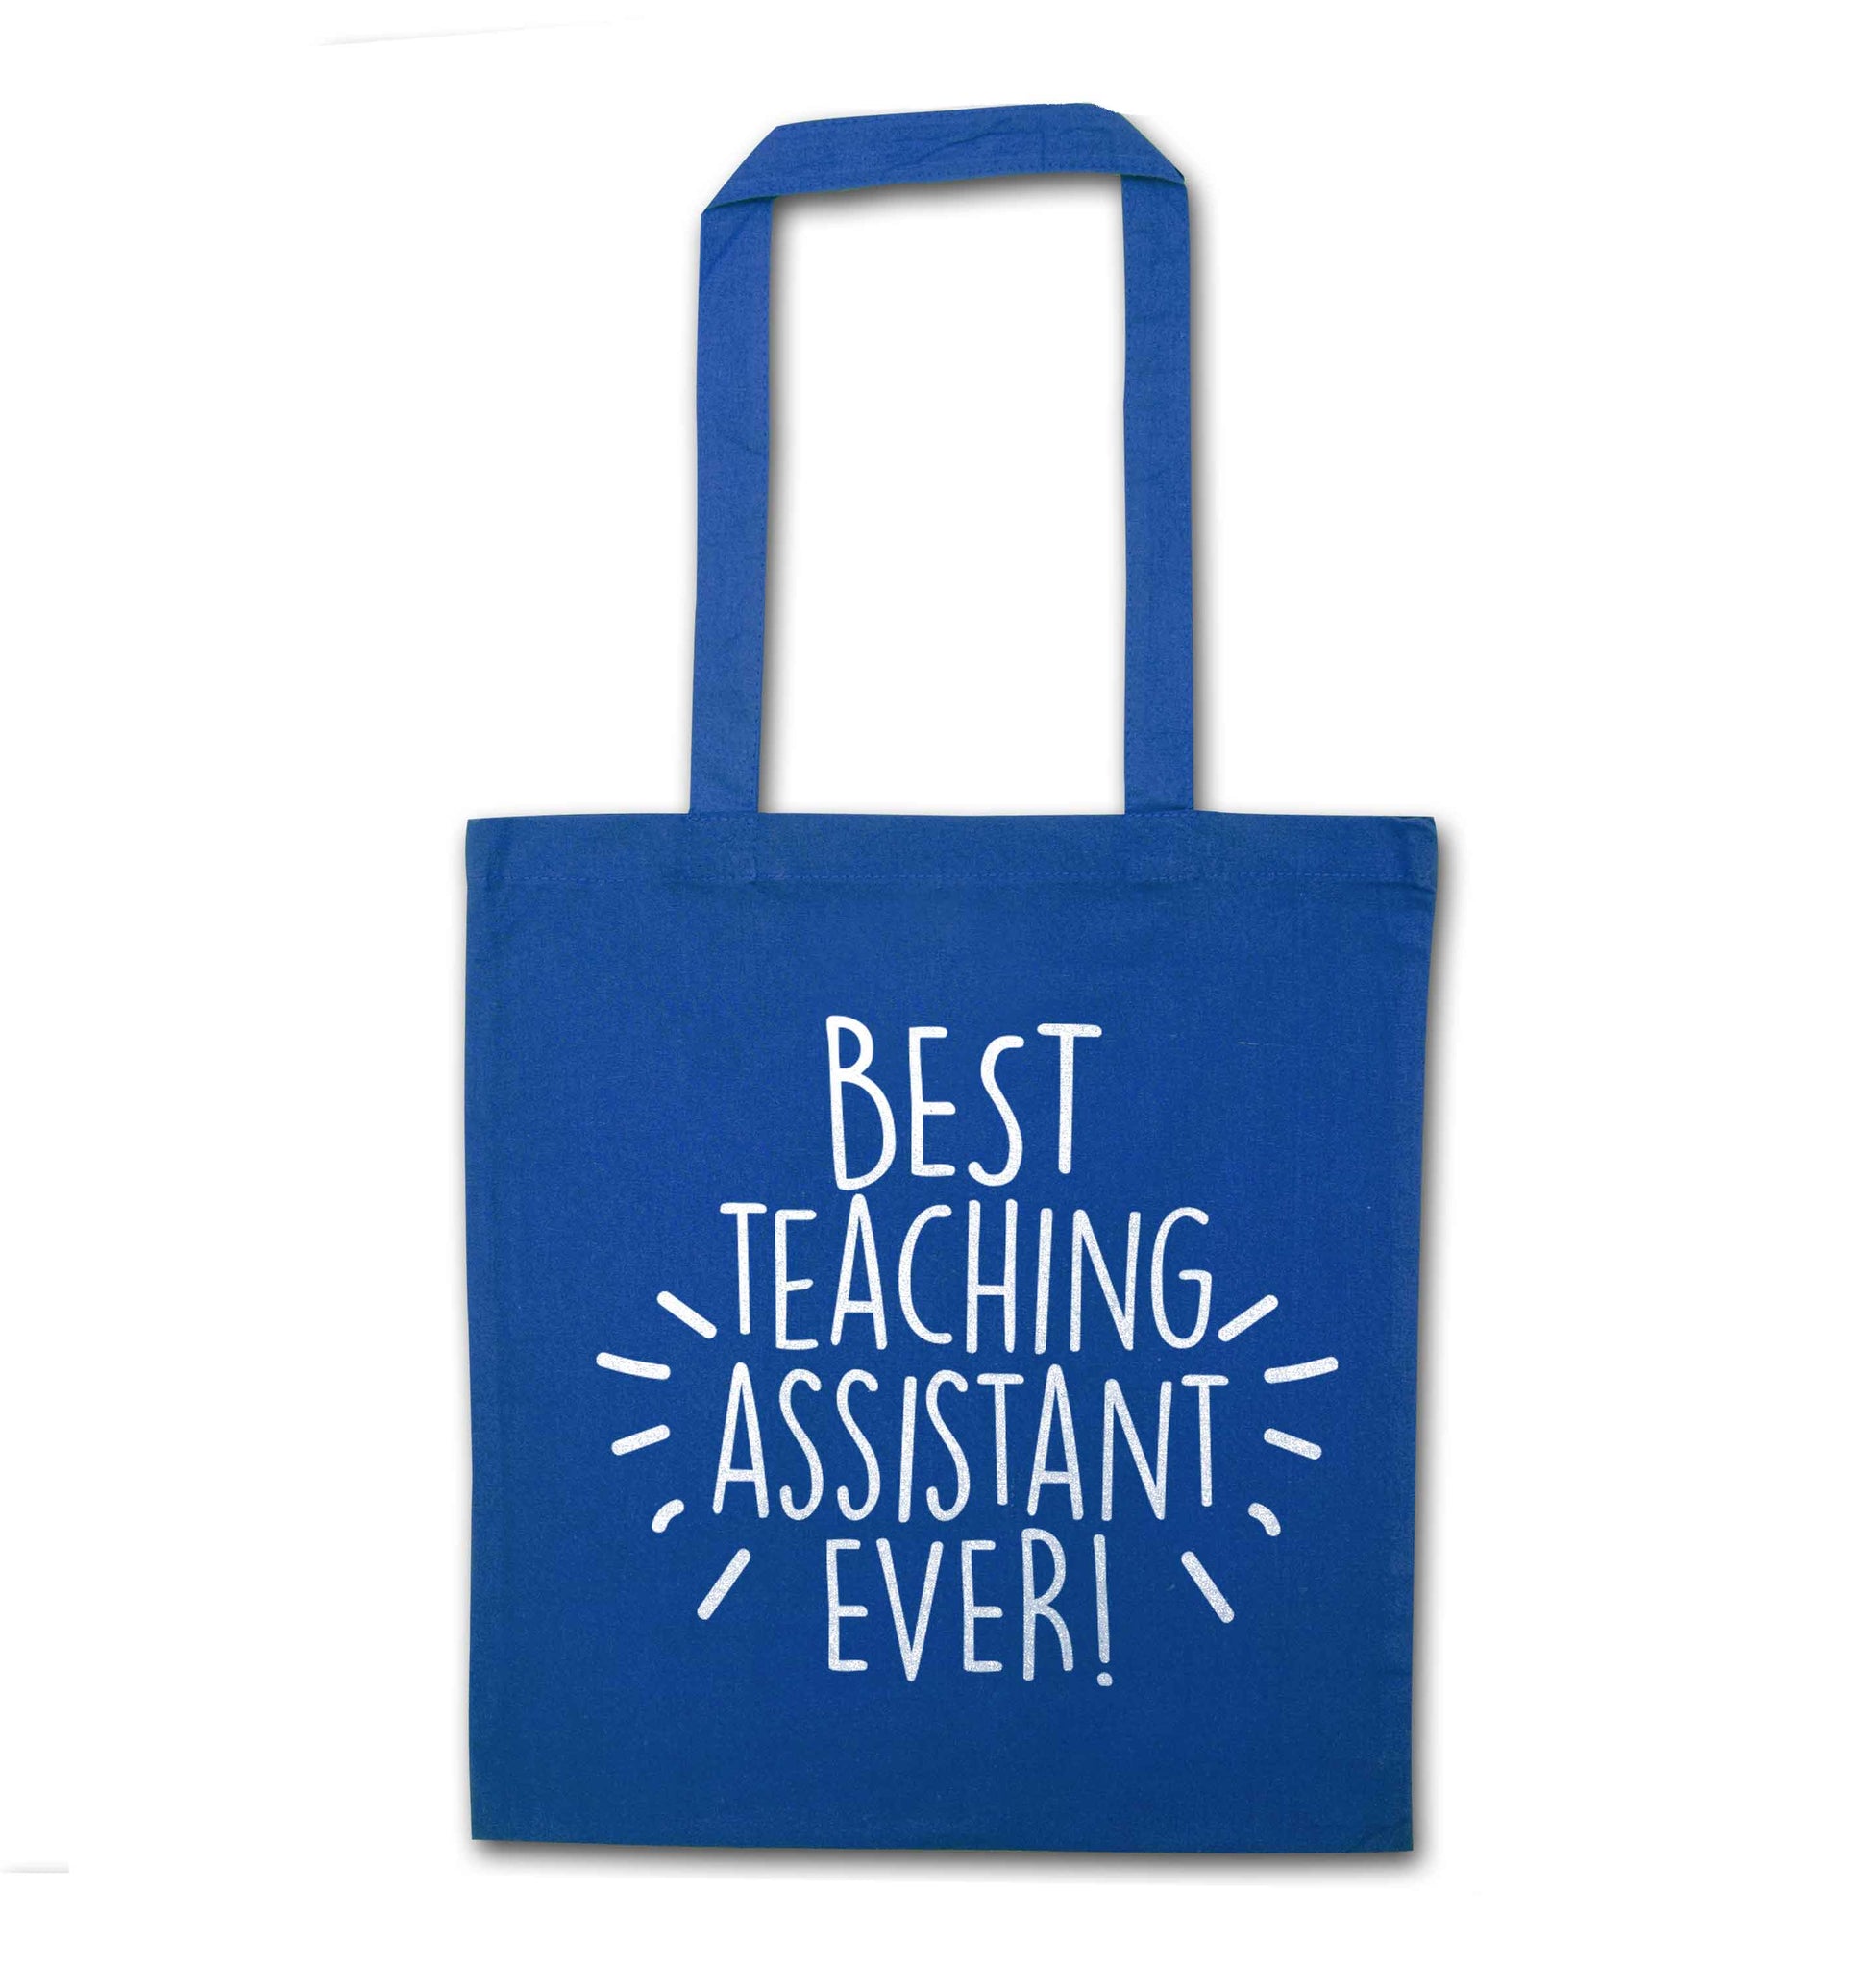 Best teaching assistant ever! blue tote bag